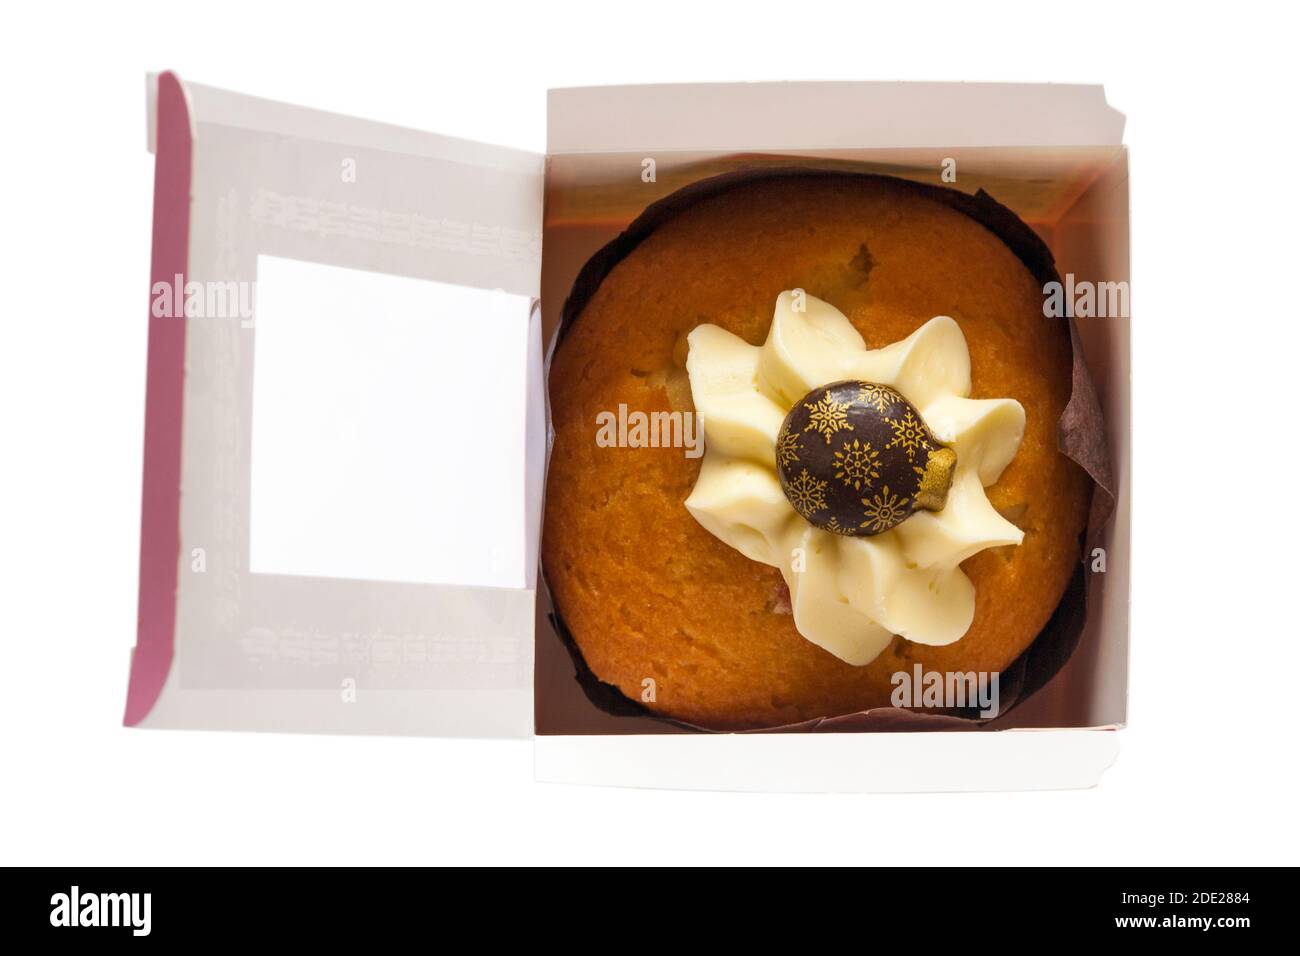 Christmas bauble muffin cake from M&S in-store bakery in box with lid open isolated on white background - Bauble Victoria Sponge Muffin Stock Photo